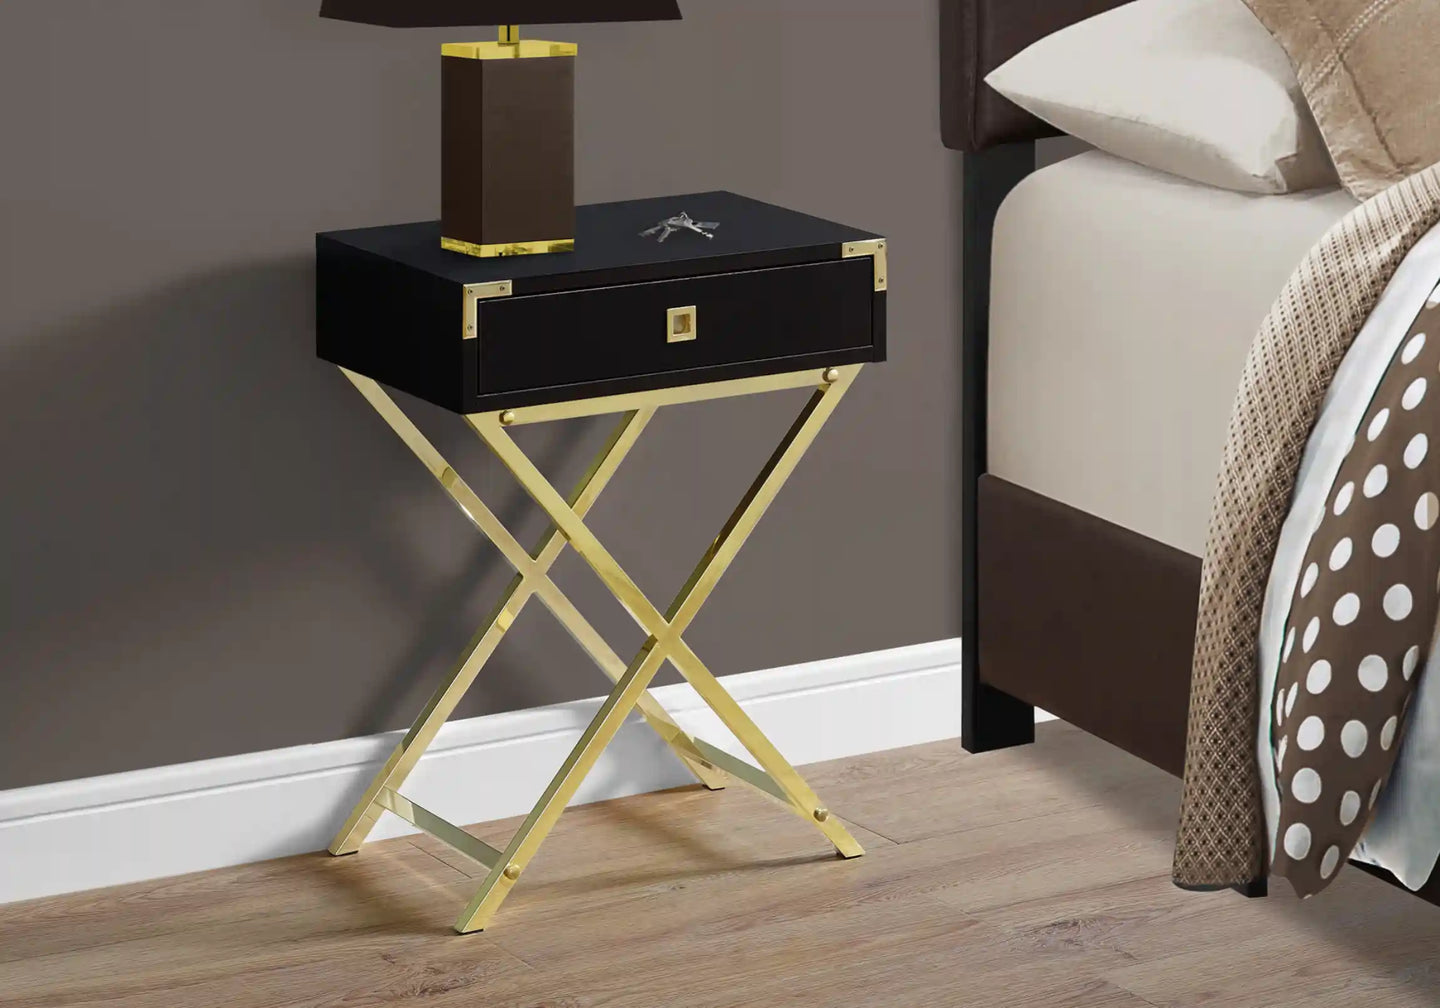 Espresso /gold Accent Table / Night Stand / Side Table - I 3556